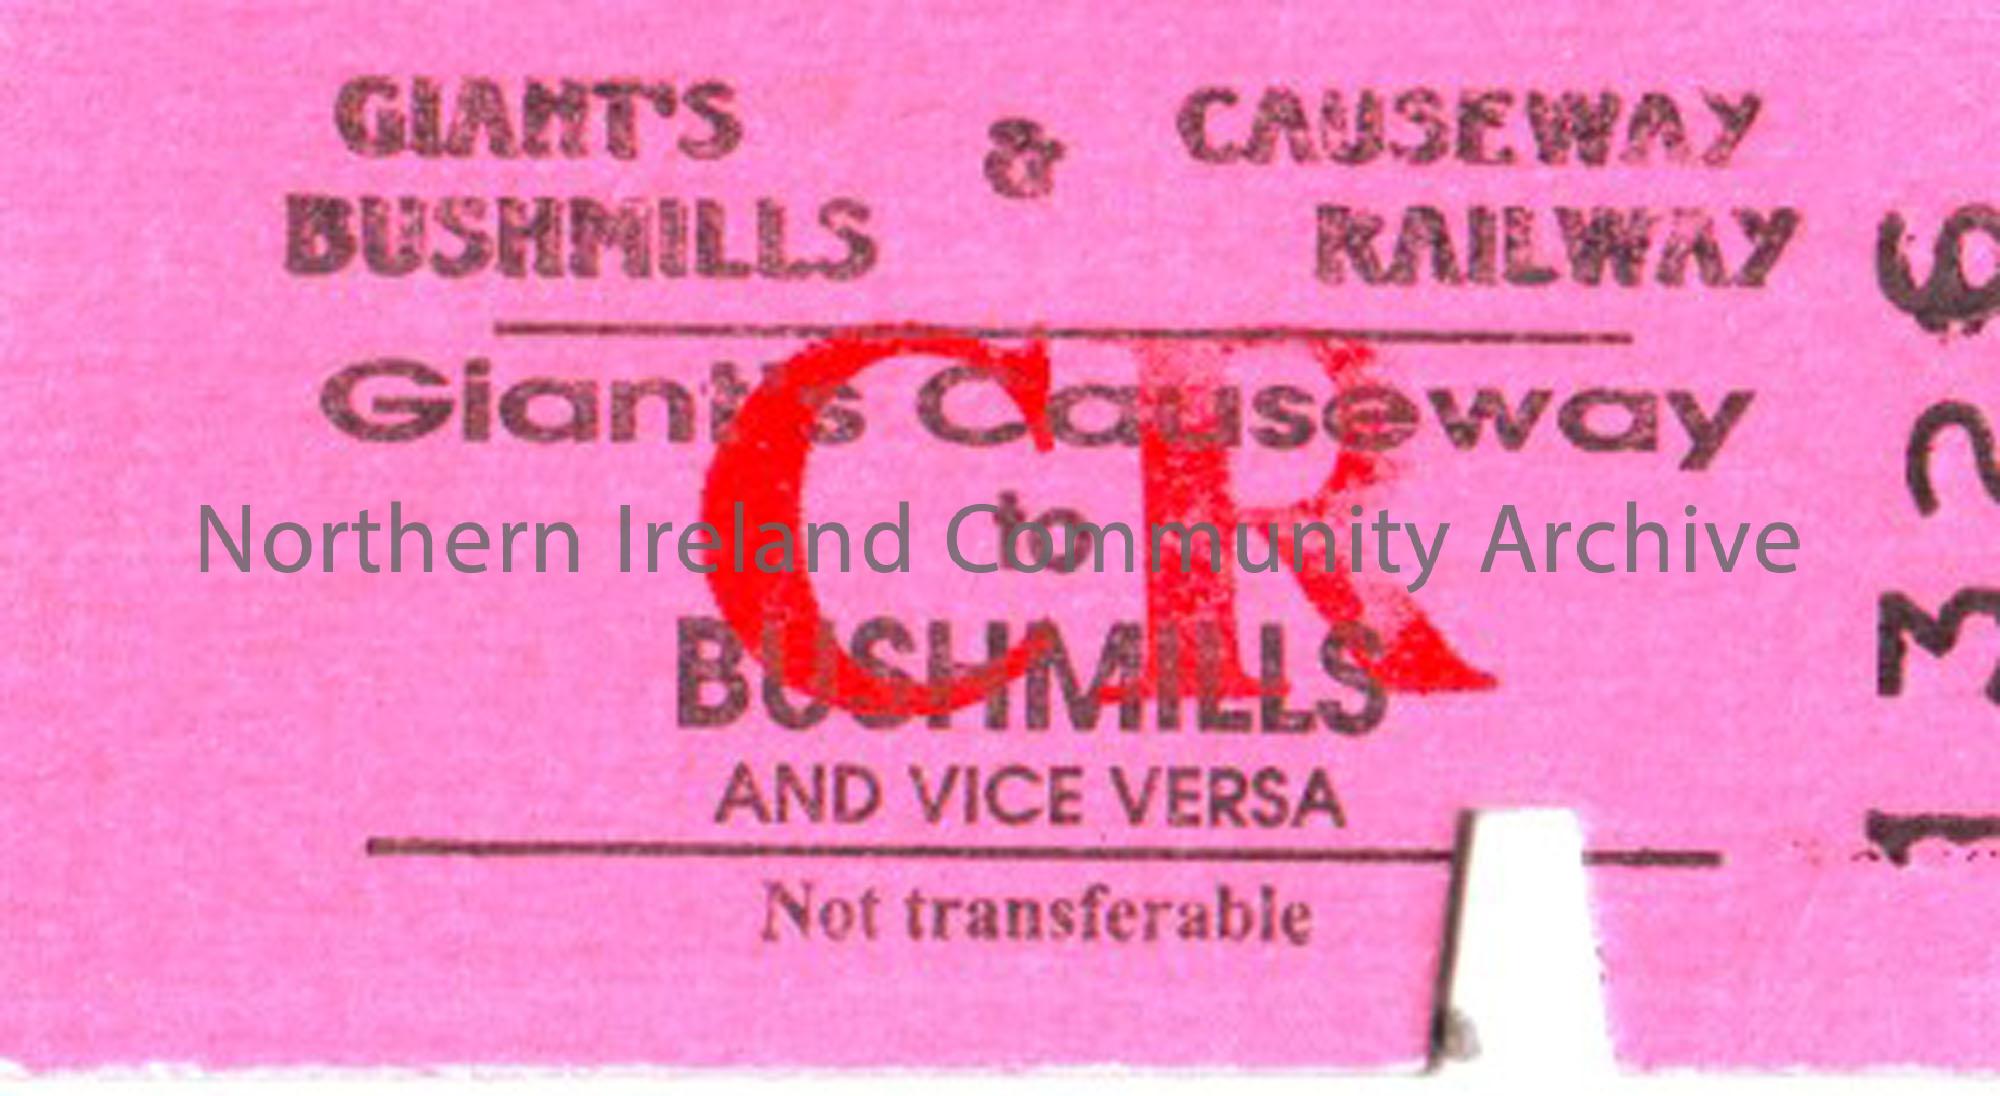 Giant’s Causeway to Bushmills and vice versa, 30th June 1902